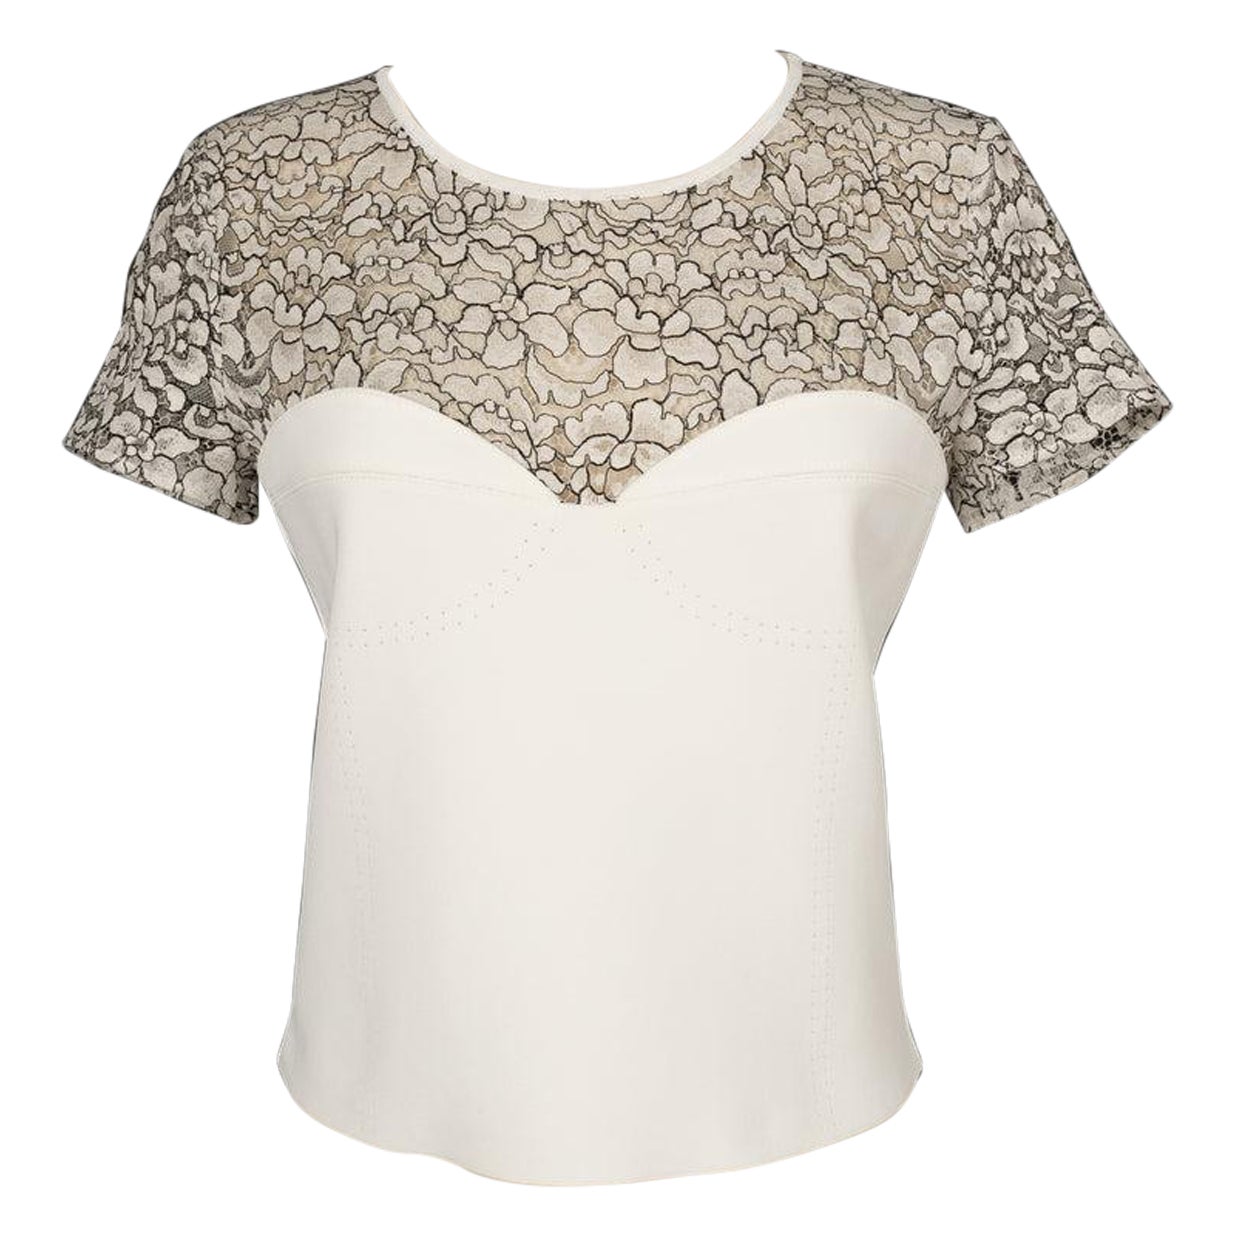 Christian Dior White Top Ornamented with Lace For Sale